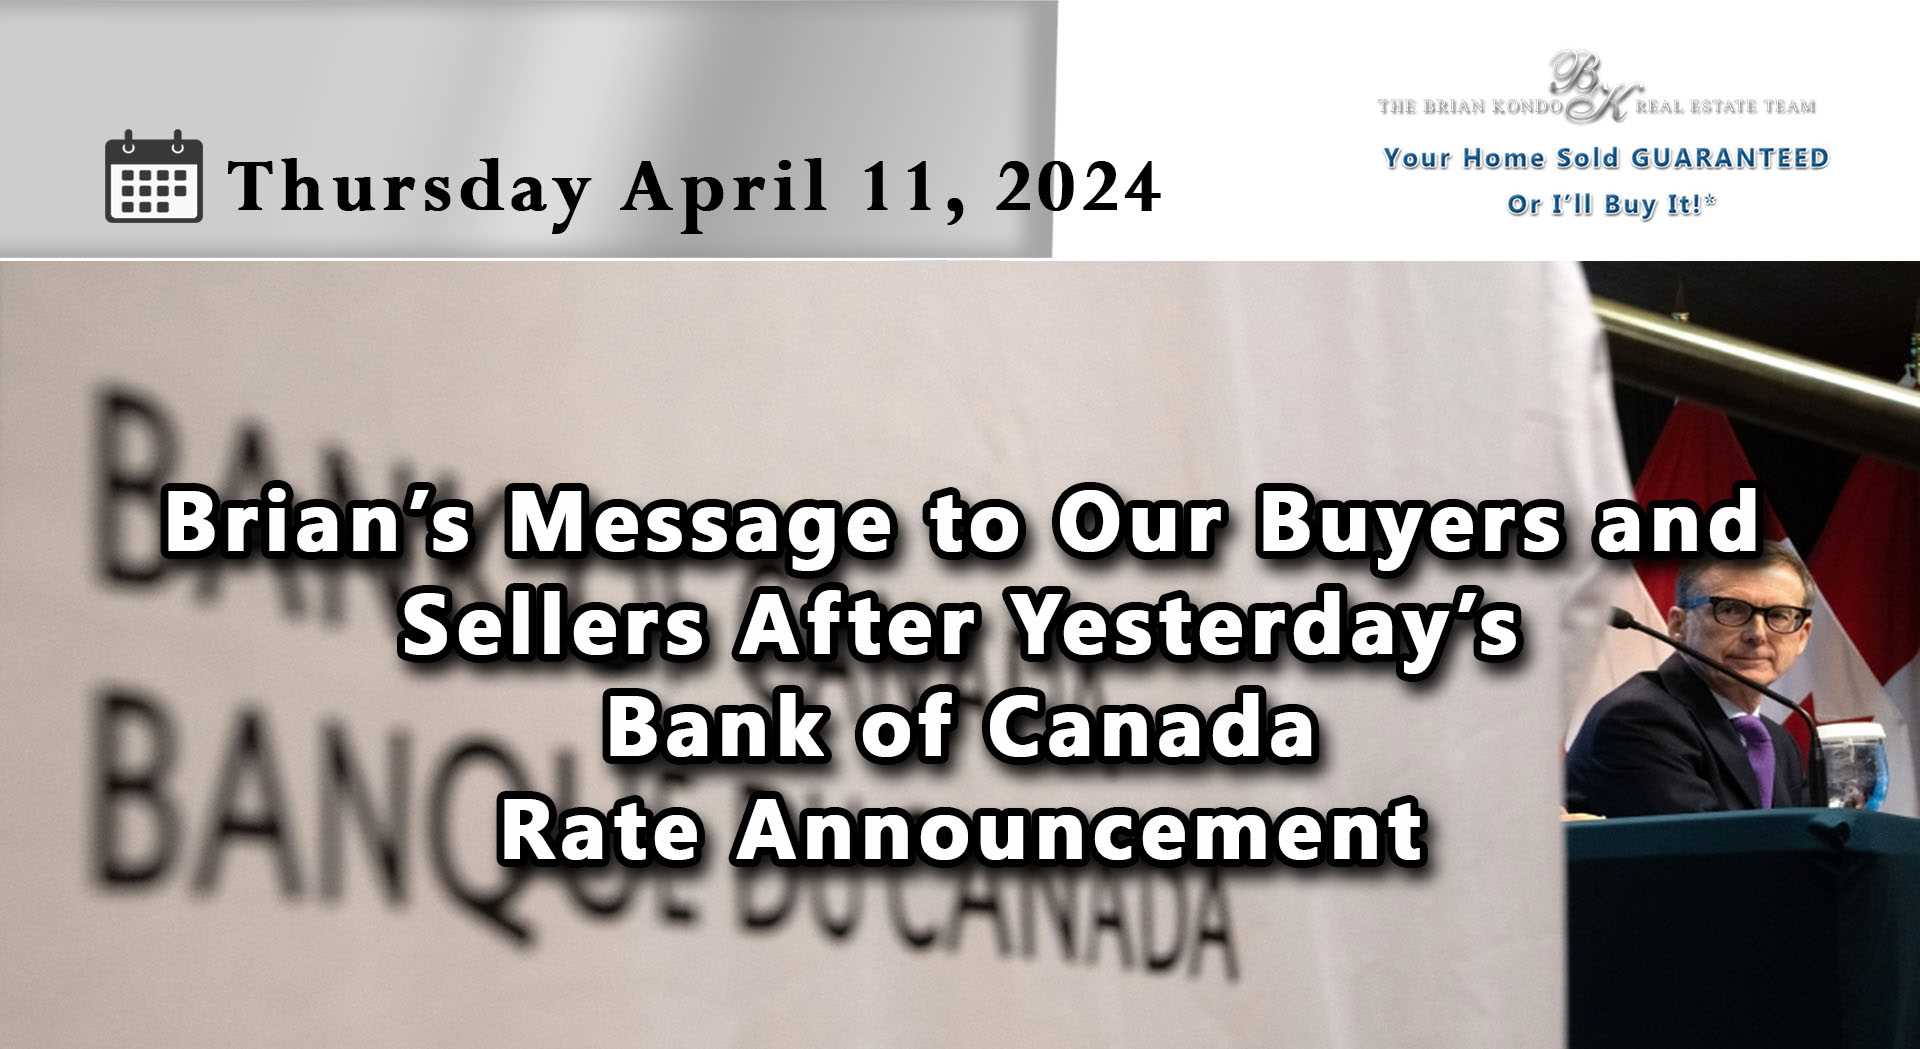 Brian’s Message to Our Buyers and Sellers After Yesterday’s Bank of Canada Rate Announcement